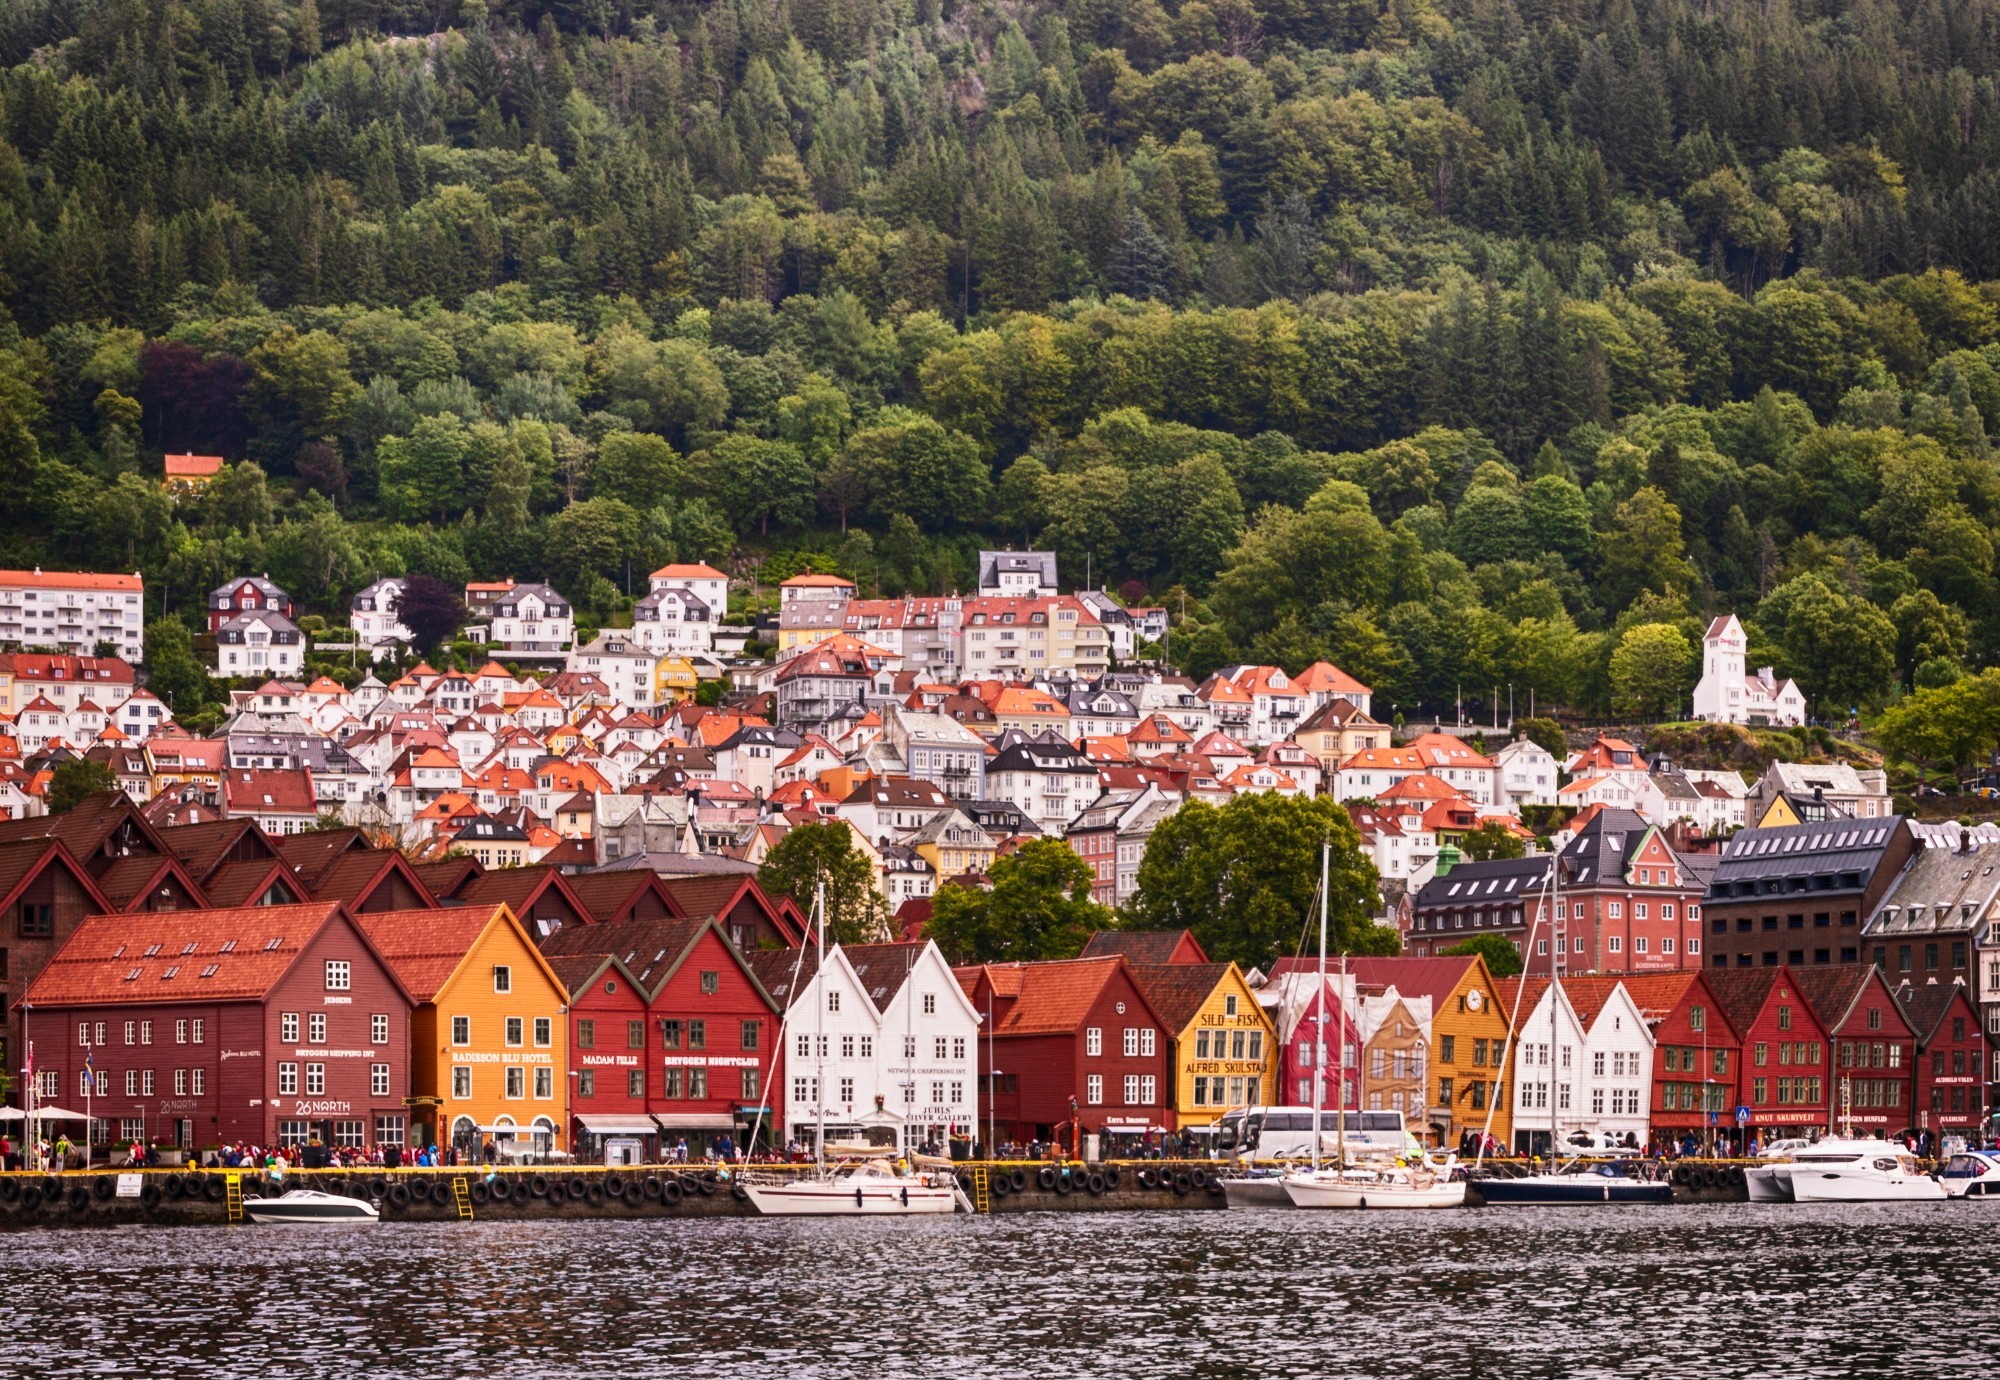 The old warehouses in Bergen